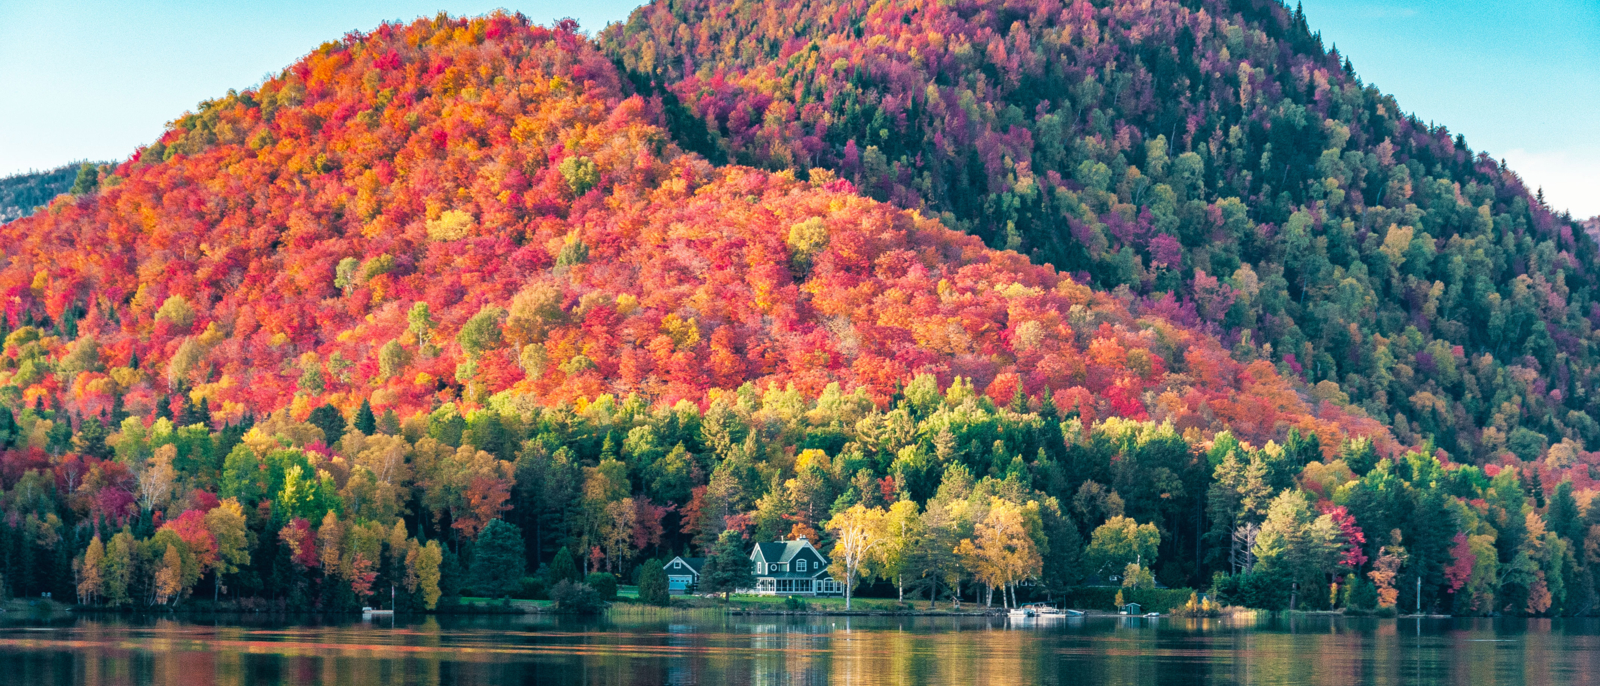 The hills covered with red maple forests behind a wooden house on the shore of a lake in Quebec, on a beautiful autumn evening